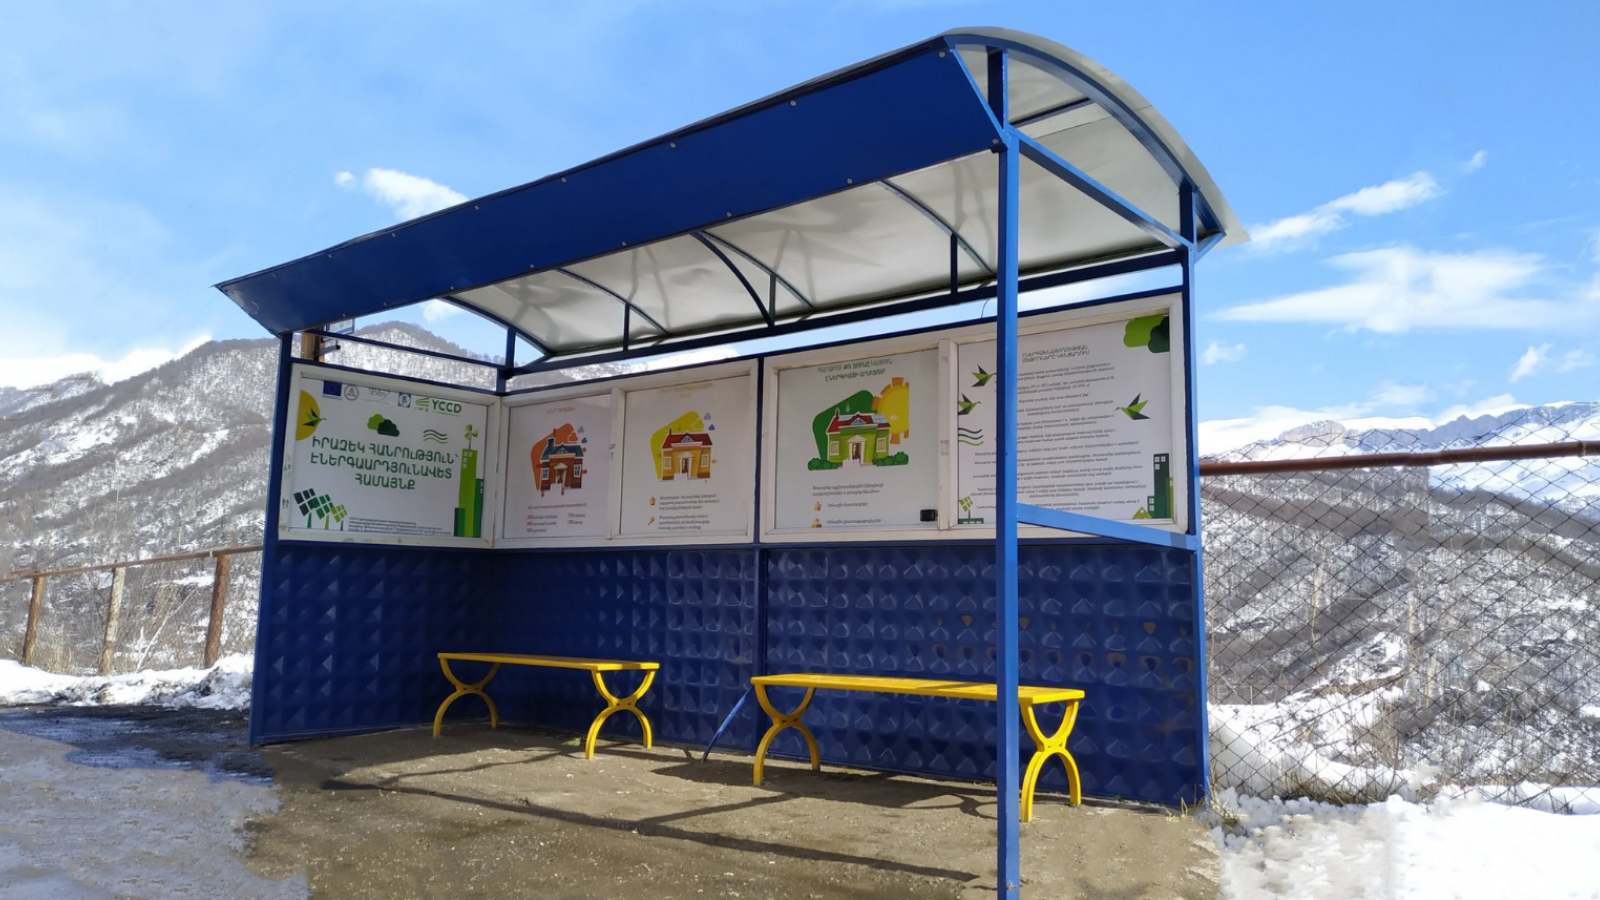 Armenia: Bus stop in Dilijan becomes solar powered thanks to EU support